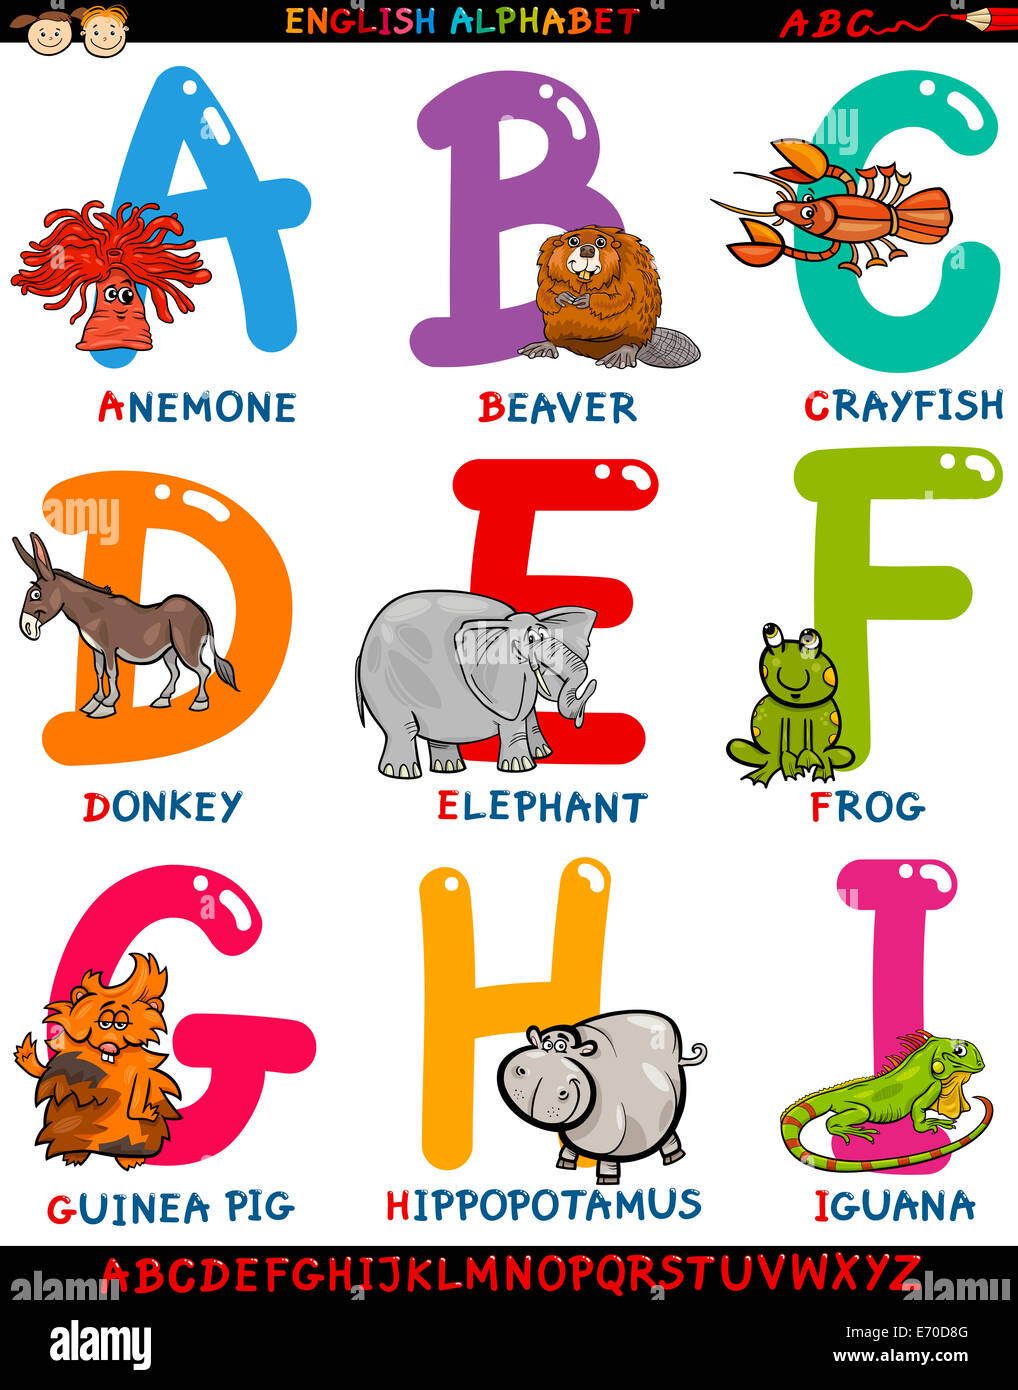 Cartoon Illustration of Colorful English Alphabet Set with Funny Animals from Letter A to I Stock Photo